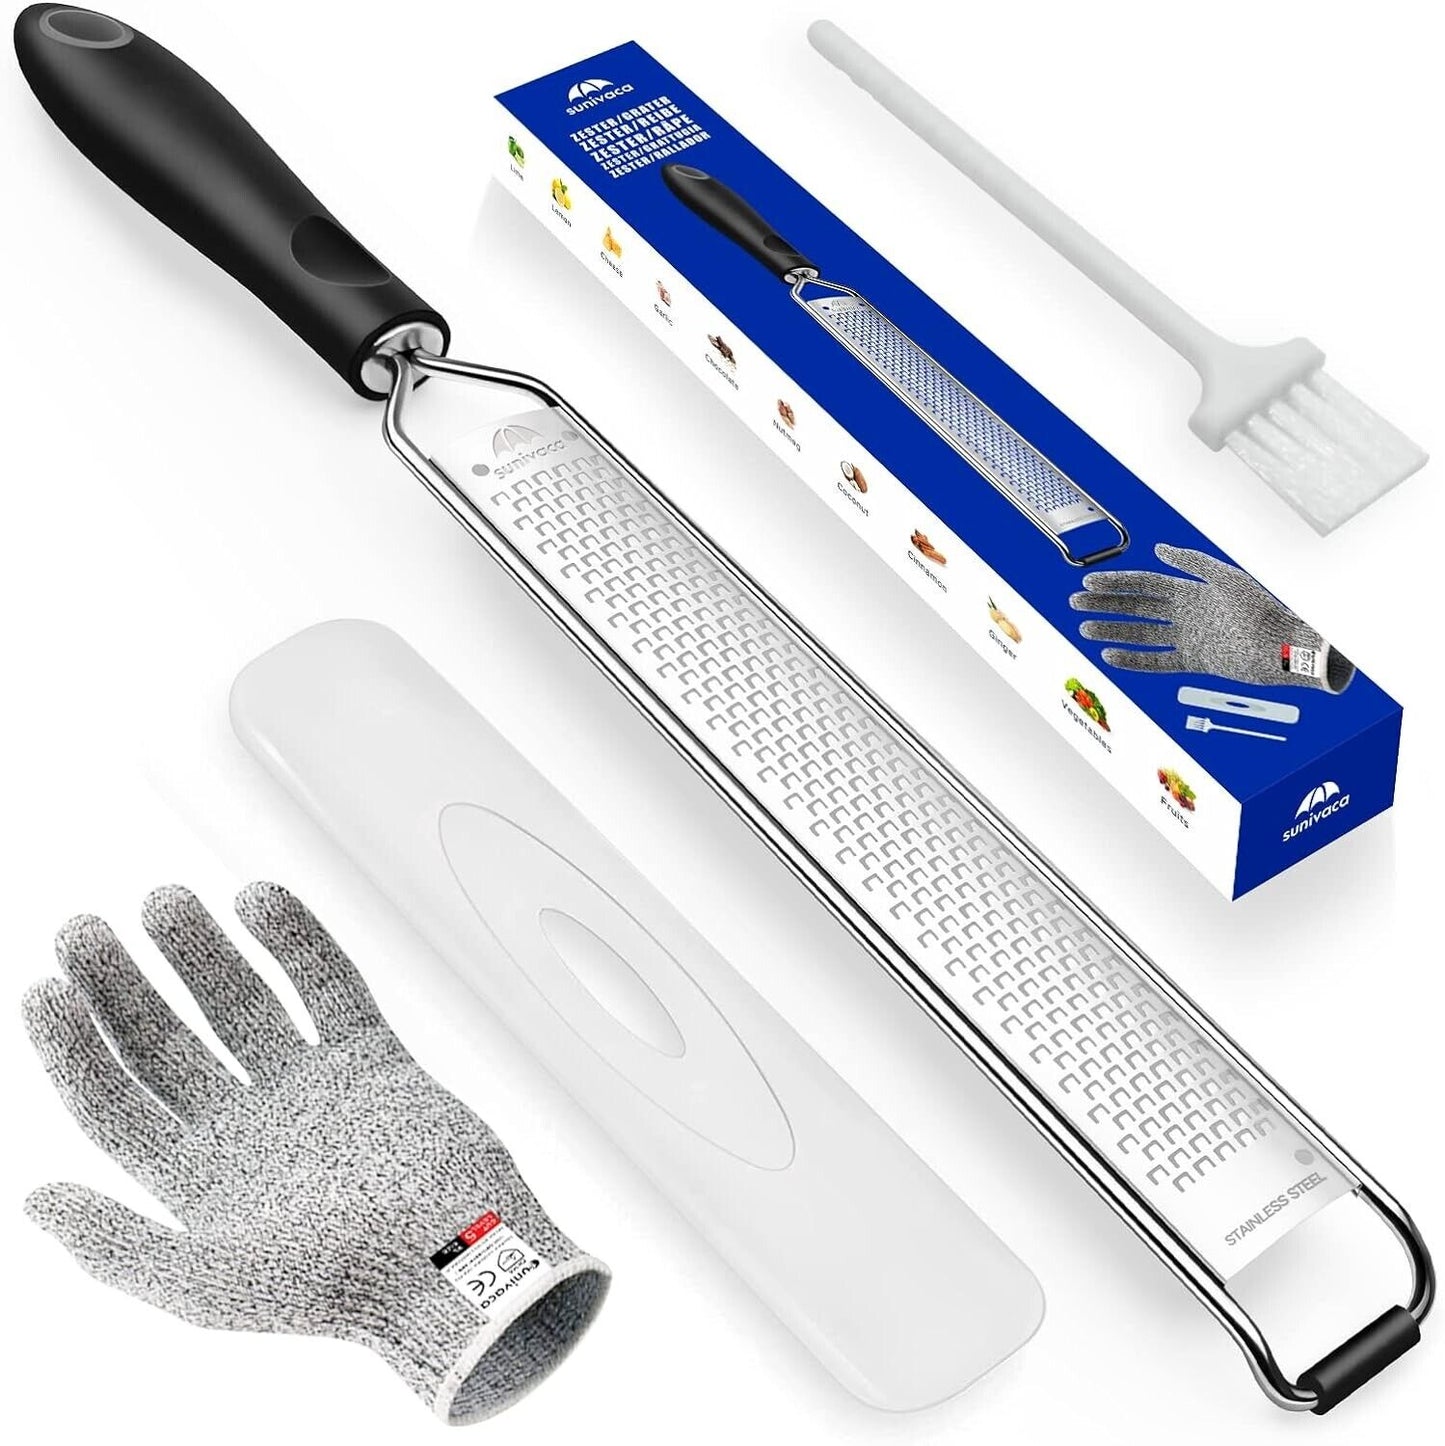 Lemon Zester & Cheese Grater with Handle - Stainless Steel, Includes Cut Glove